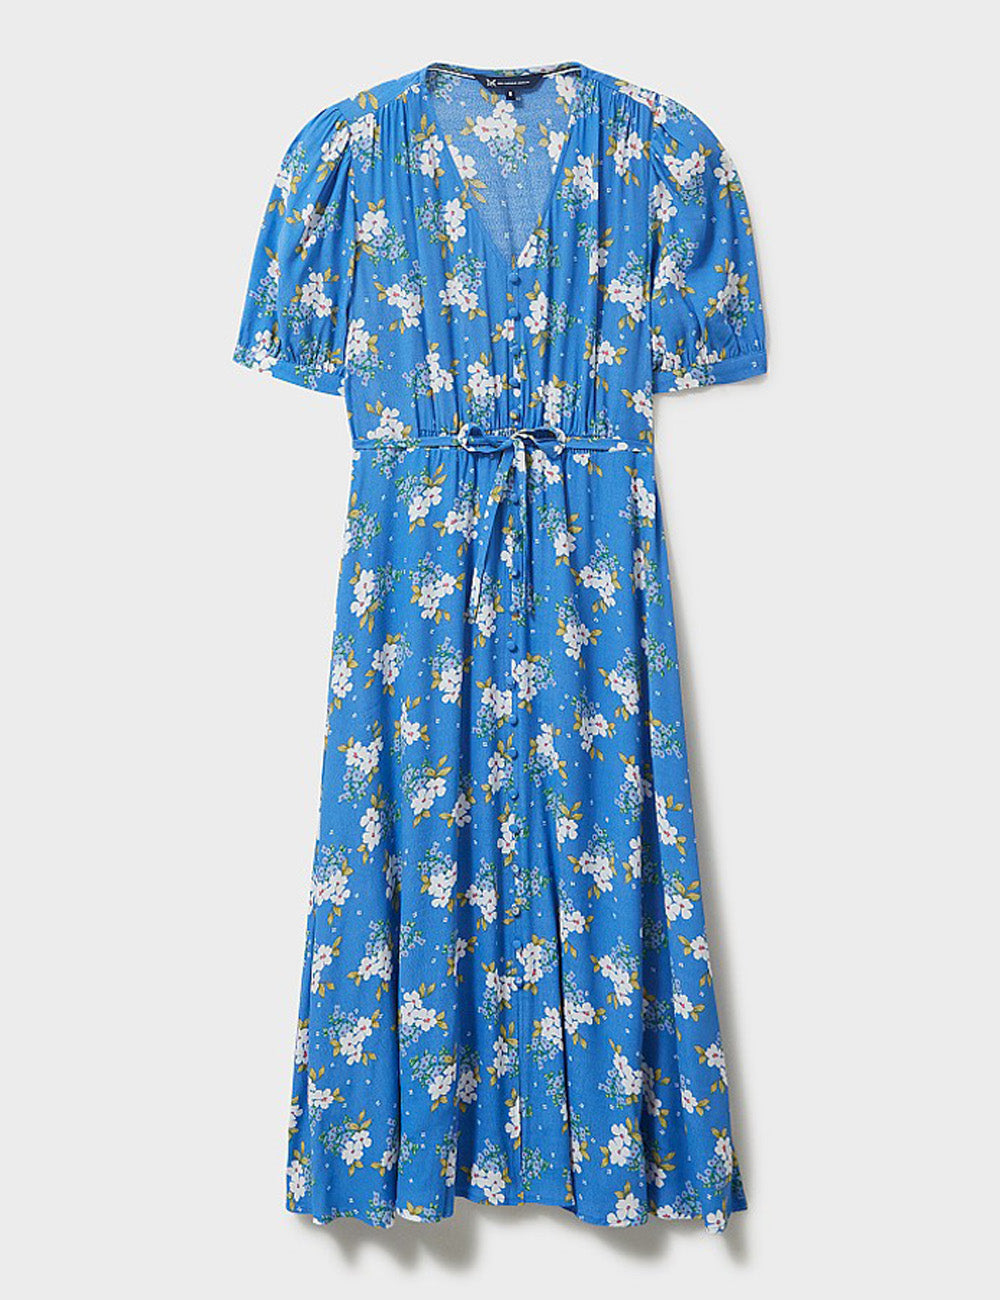 Crew Clothing's Lola Dress in Blue Floral on a white background